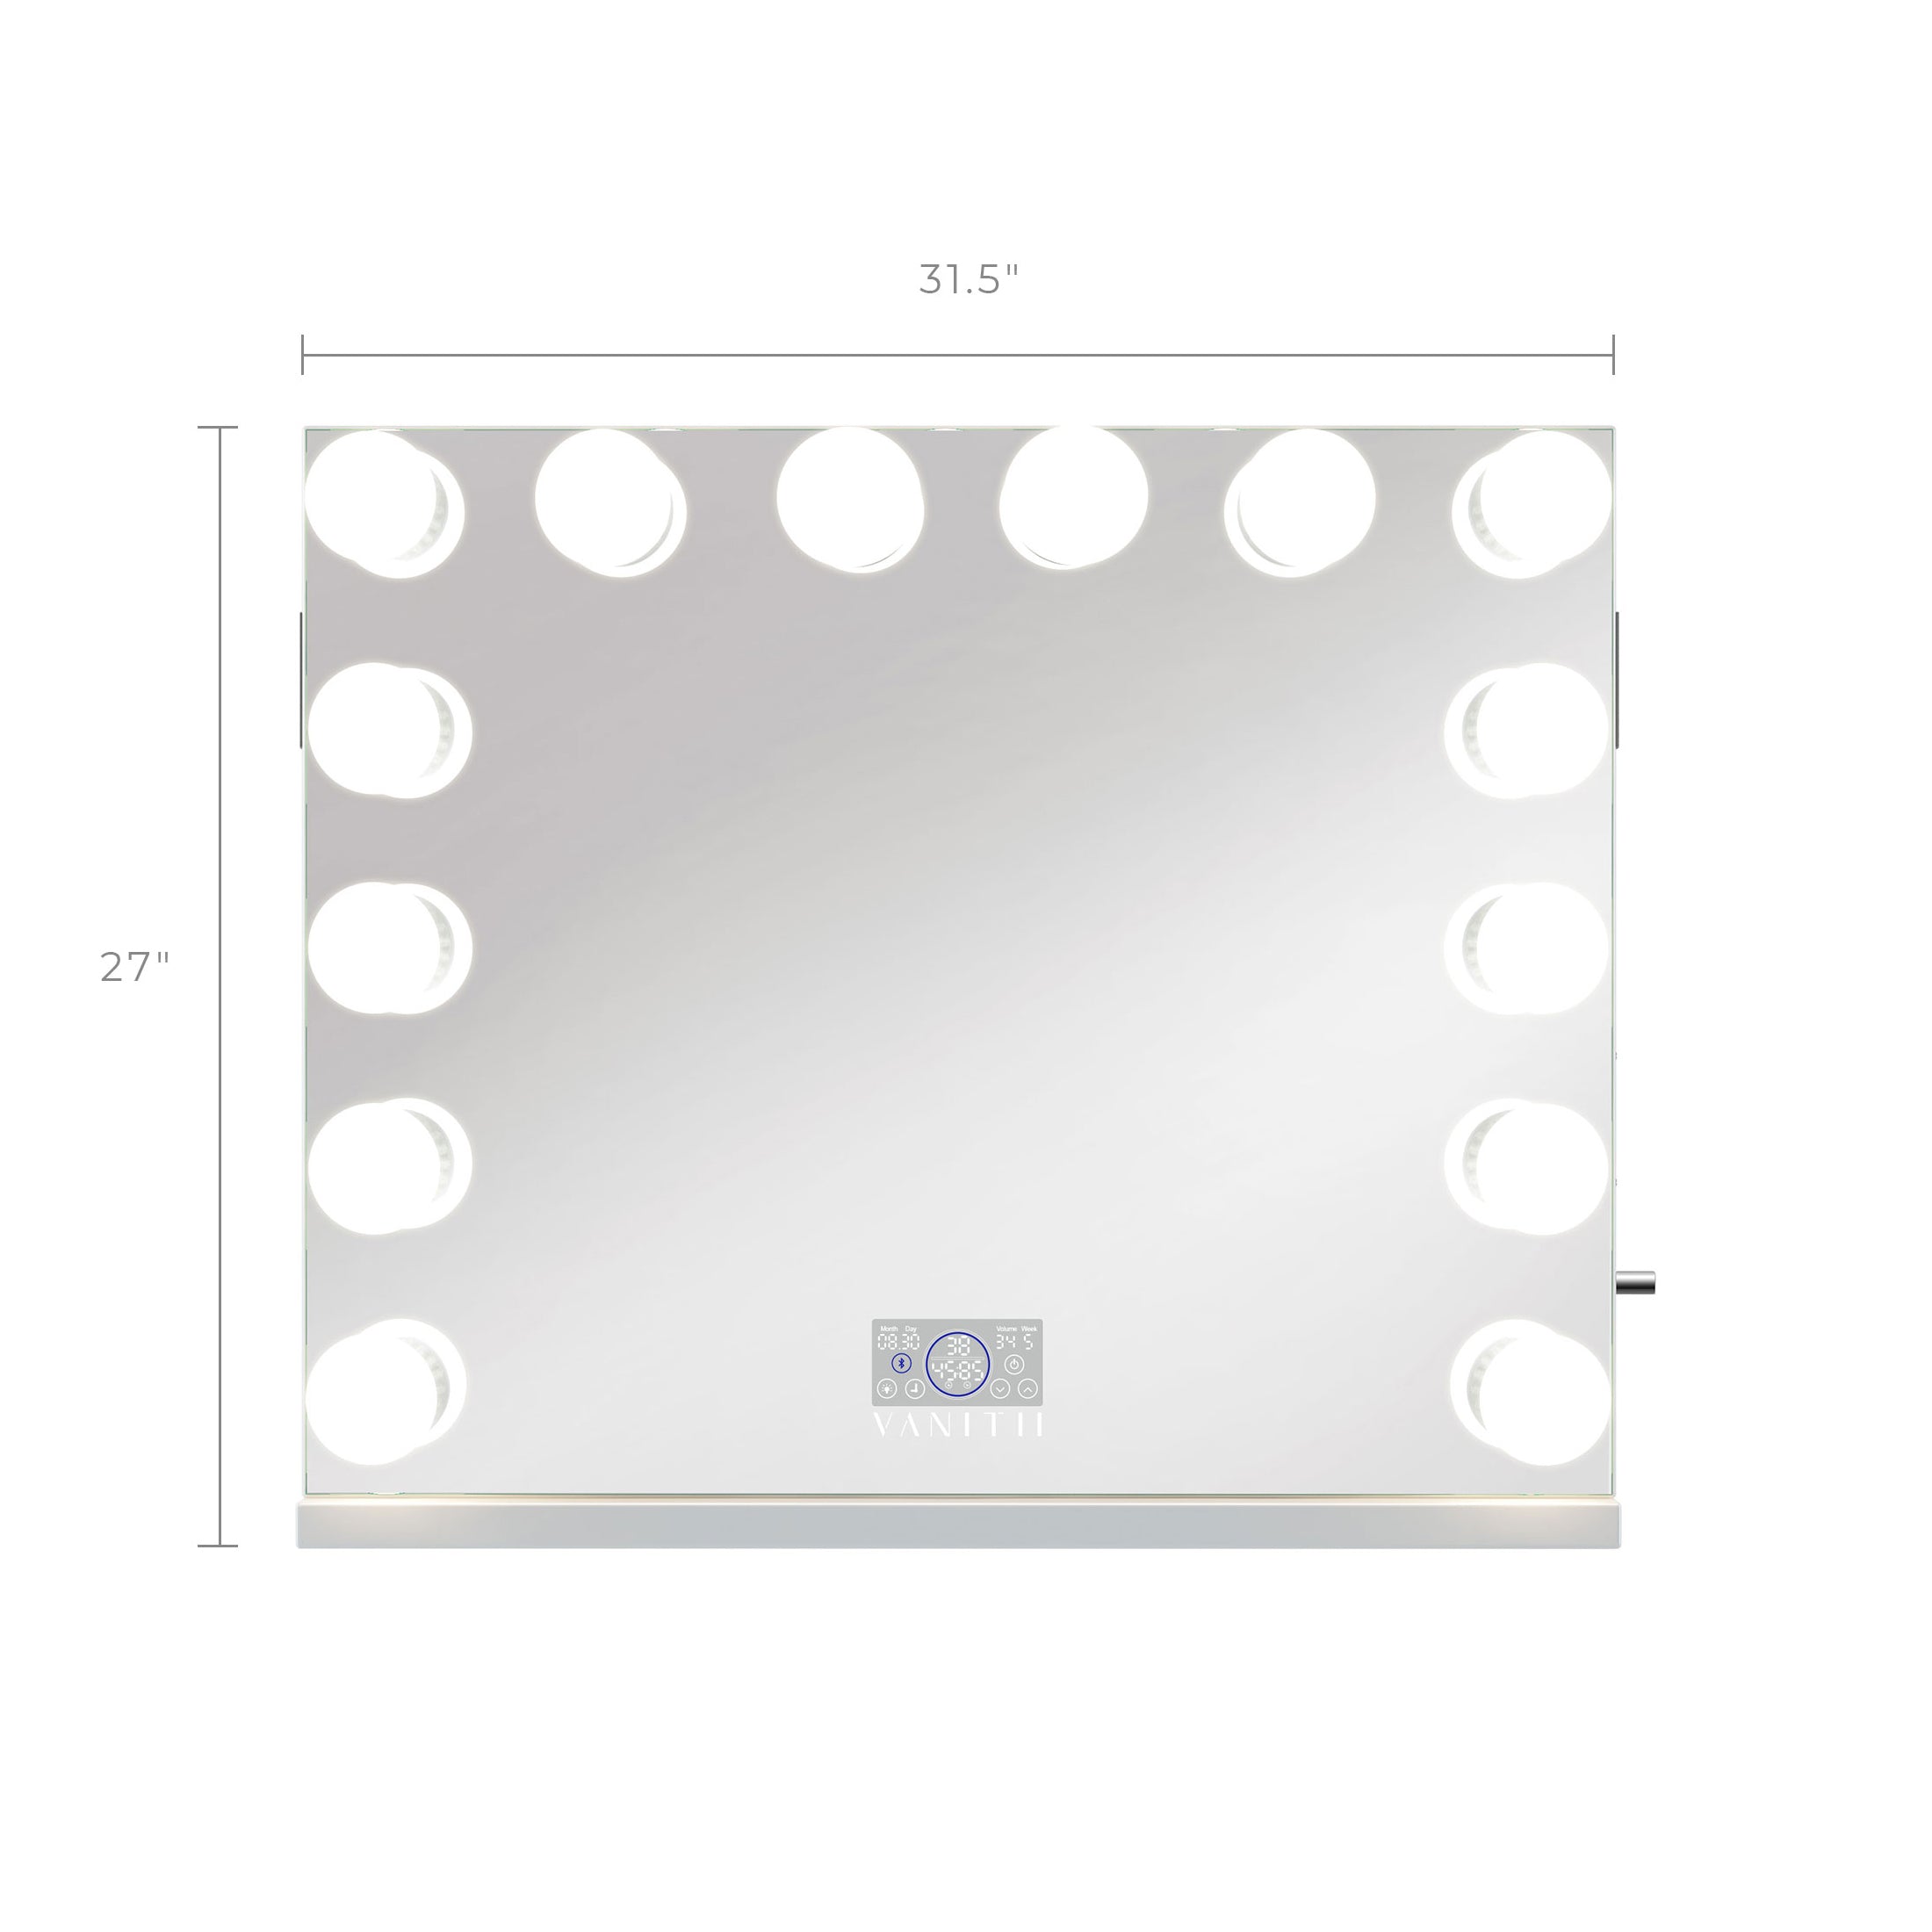 Marilyn Hollywood Vanity Mirror Pro - Tabletop or Wall Mount Vanity Mirror with 14 Dimmable LED Bulbs_VANITII